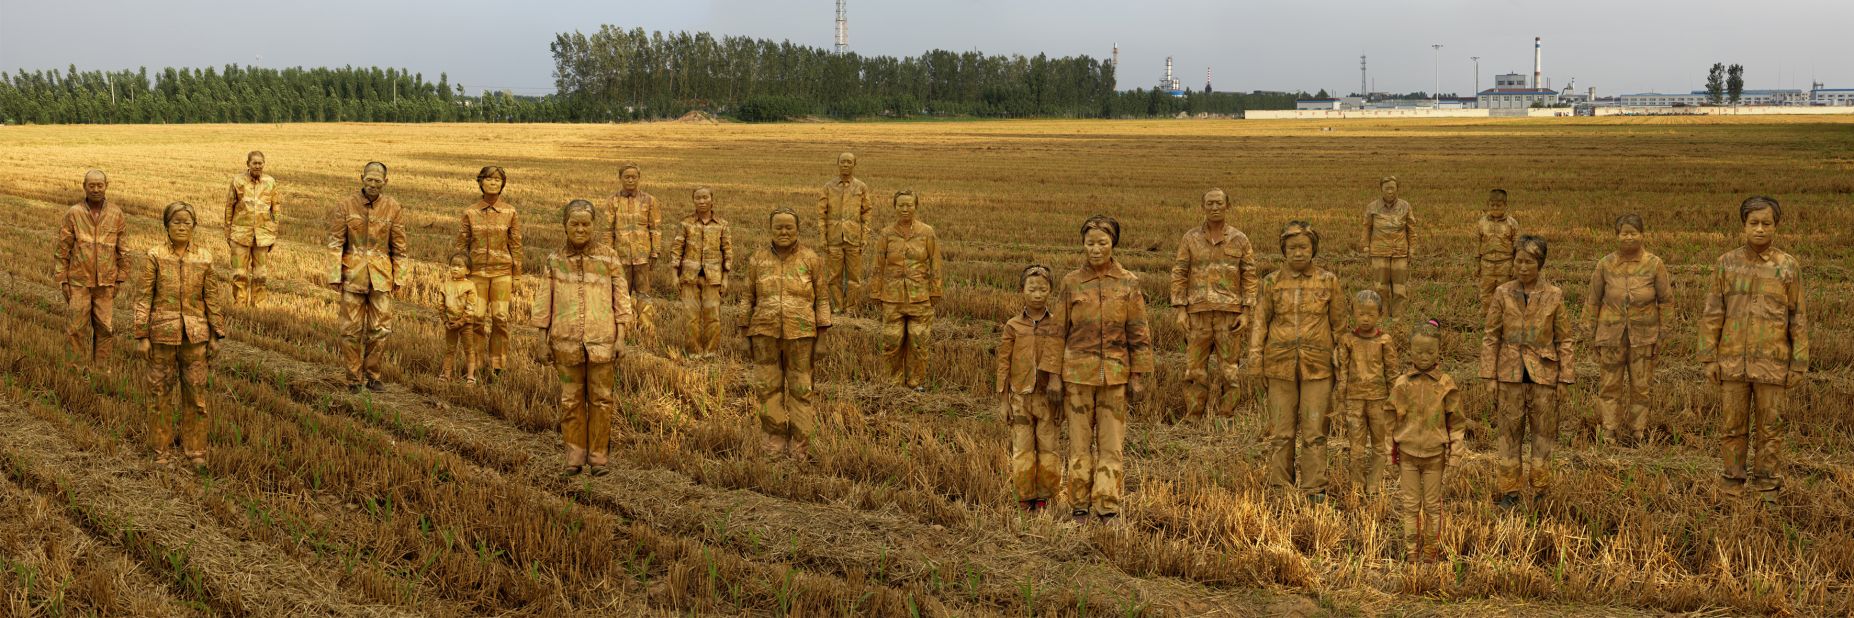 The artist work has evolved to include other people. In this piece, he paints 23 residents affected by one of China's infamous cancer villages. Chemical factories can be seen in the distance. "When I made this work about a cancer village, my art reflected human suffering through commemoration and grief."<br />